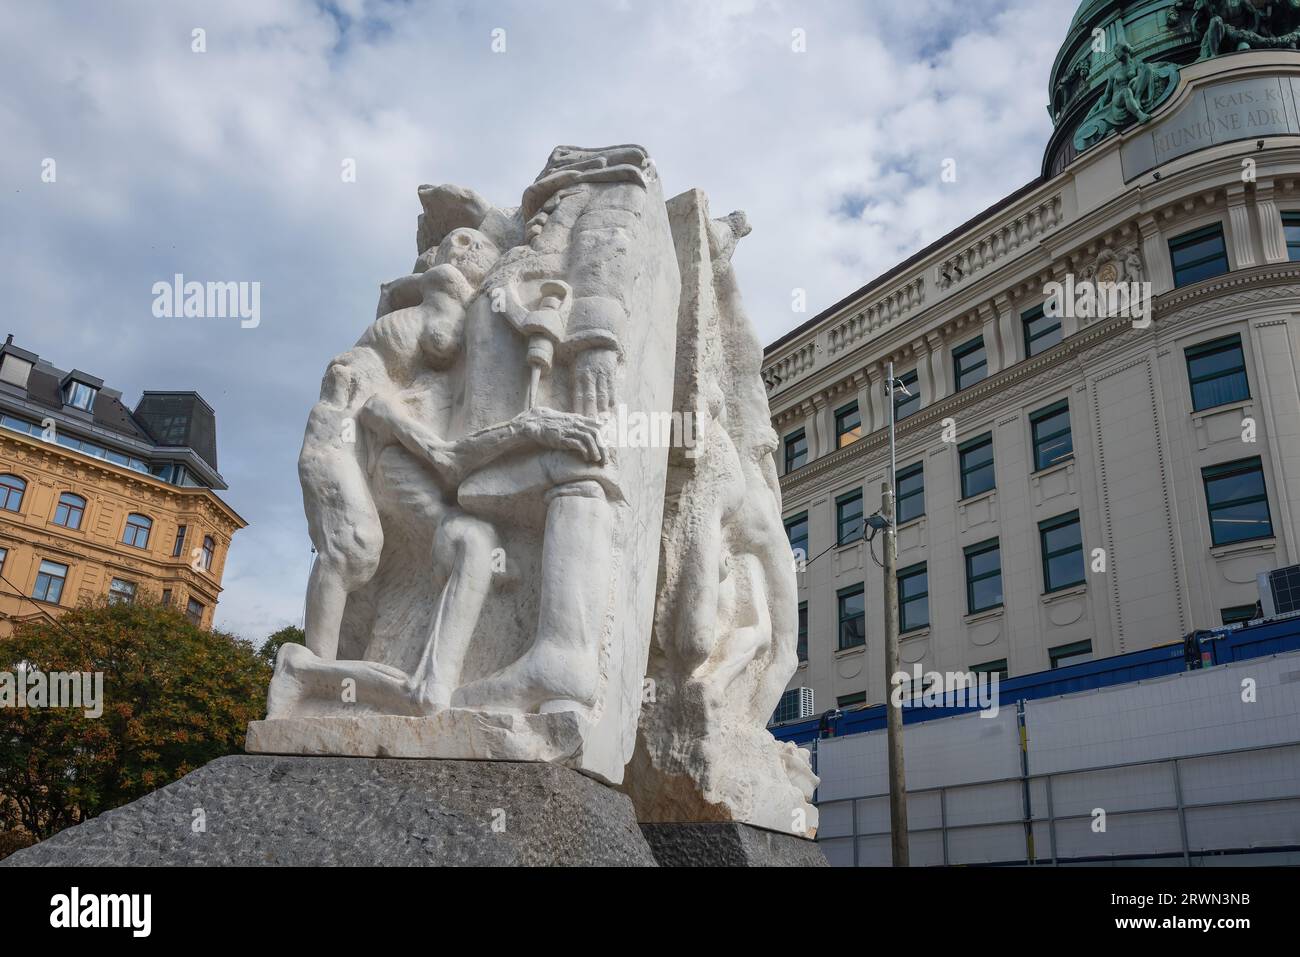 Gate of Violence Sculpture part of the Memorial against war and fascism by Alfred Hrdlicka at Albertinaplatz - Vienna, Austria Stock Photo